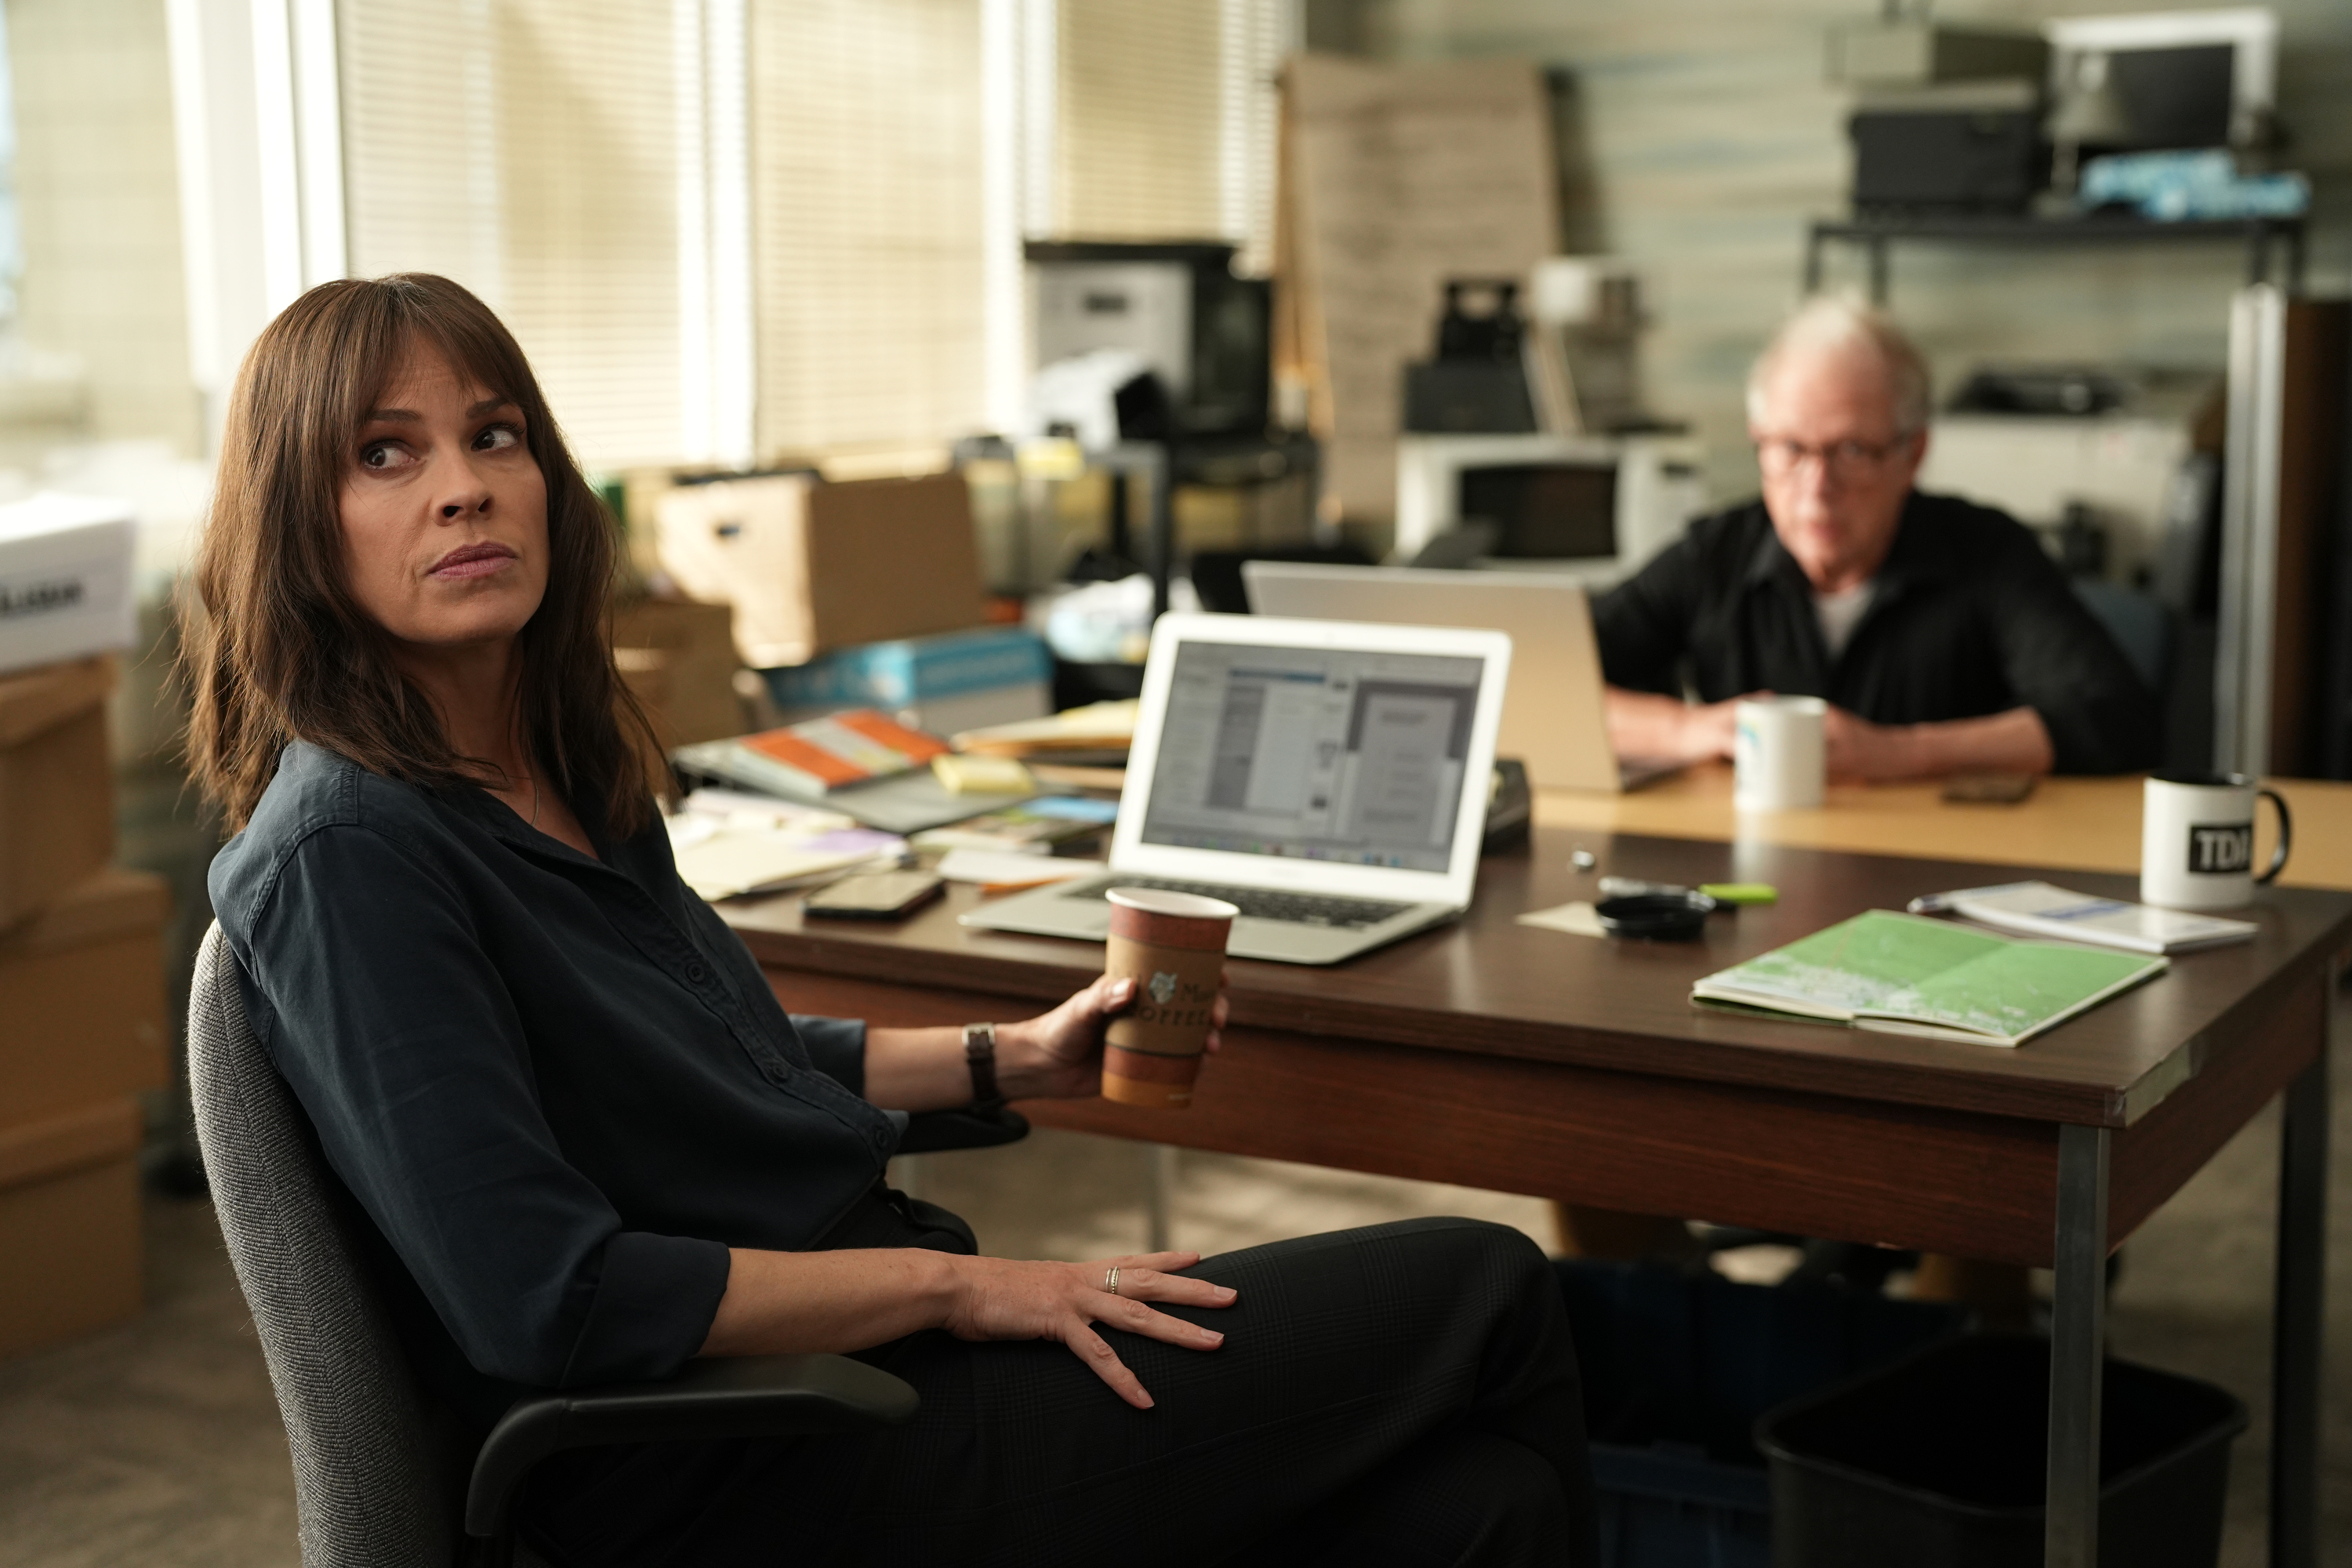 Hilary Swank as Eileen Fitzgerald in "Alaska Daily" in 2022 | Source: Getty Images